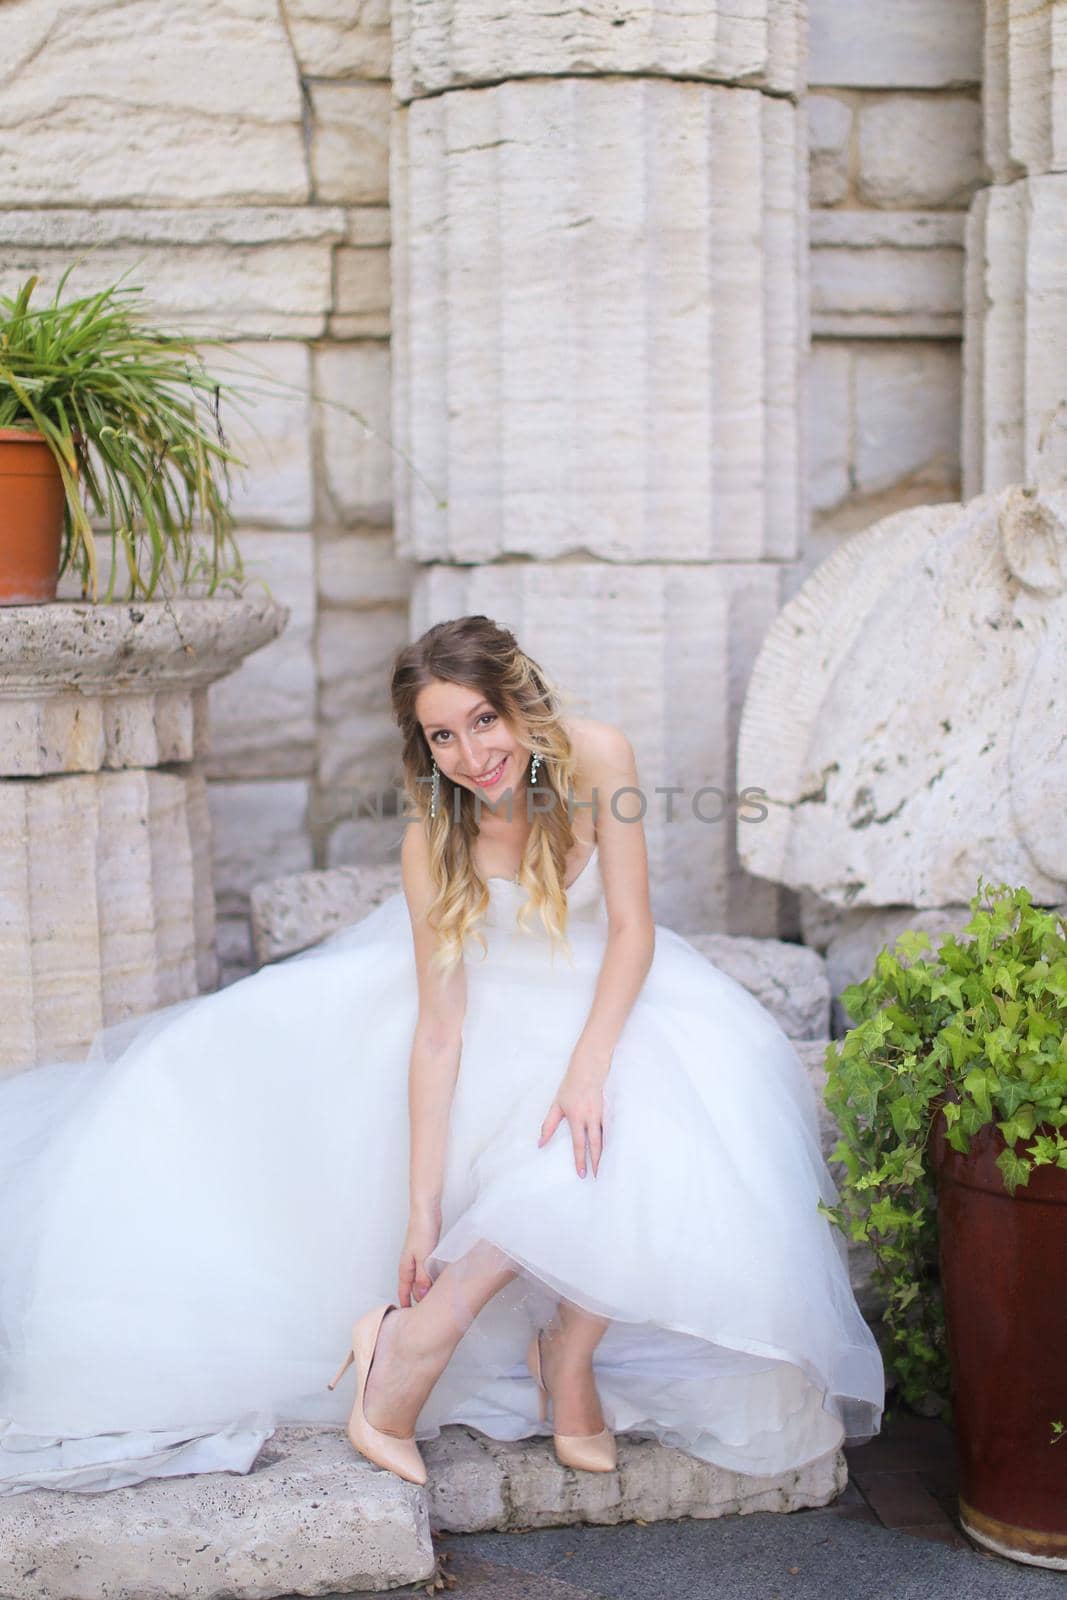 Caucasian smiling fiancee sitting near ancient columns and and putting on shoes. Concept of bridal photo session and wedding.